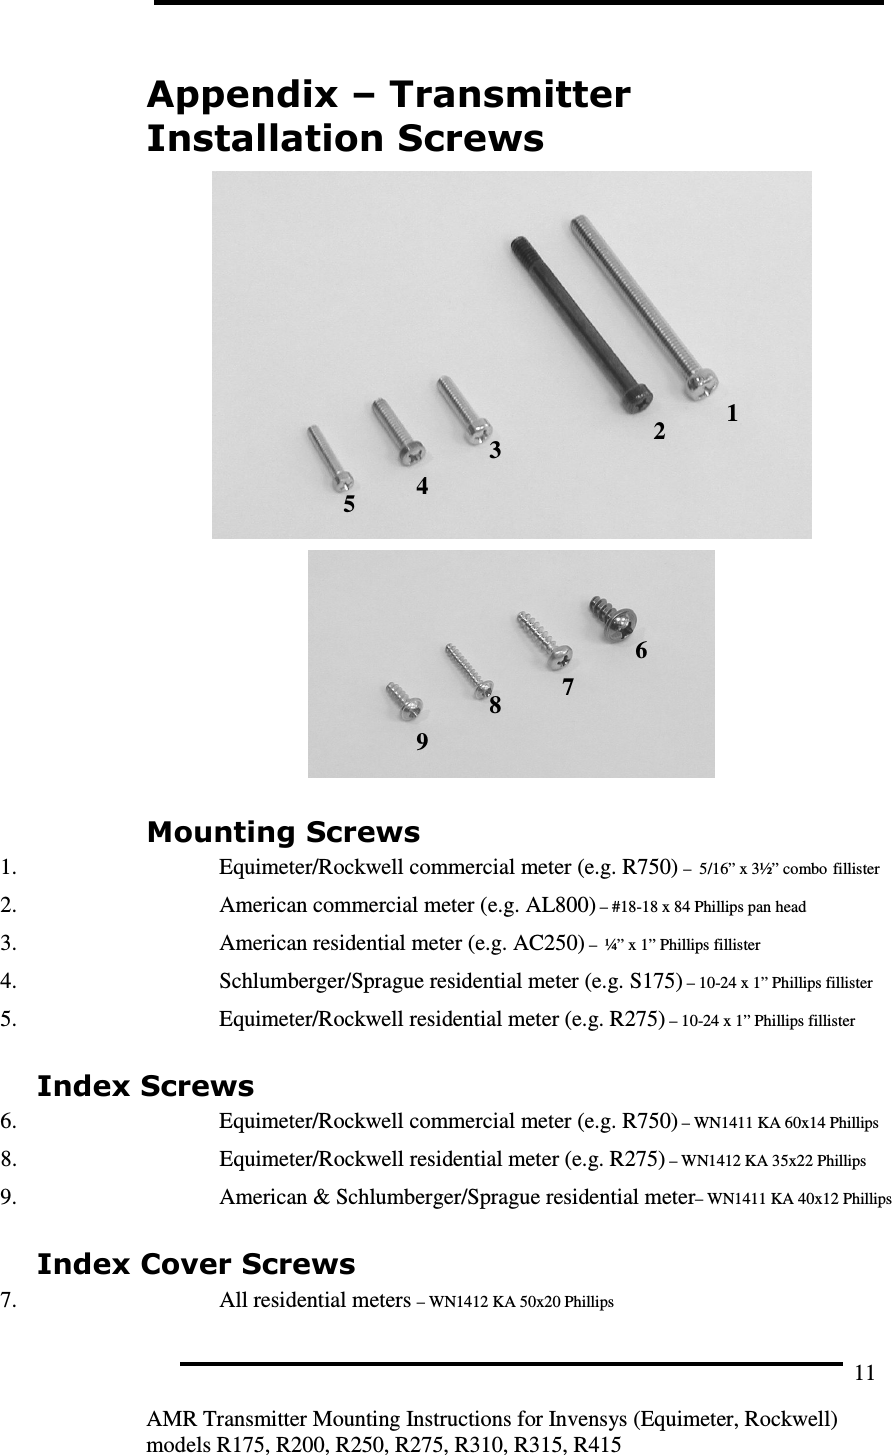         AMR Transmitter Mounting Instructions for Invensys (Equimeter, Rockwell) models R175, R200, R250, R275, R310, R315, R415 11 Appendix – Transmitter Installation Screws   Mounting Screws 1. Equimeter/Rockwell commercial meter (e.g. R750) –  5/16” x 3½” combo fillister  2. American commercial meter (e.g. AL800) – #18-18 x 84 Phillips pan head 3. American residential meter (e.g. AC250) –  ¼” x 1” Phillips fillister  4. Schlumberger/Sprague residential meter (e.g. S175) – 10-24 x 1” Phillips fillister 5. Equimeter/Rockwell residential meter (e.g. R275) – 10-24 x 1” Phillips fillister Index Screws 6. Equimeter/Rockwell commercial meter (e.g. R750) – WN1411 KA 60x14 Phillips 8. Equimeter/Rockwell residential meter (e.g. R275) – WN1412 KA 35x22 Phillips 9. American &amp; Schlumberger/Sprague residential meter– WN1411 KA 40x12 Phillips Index Cover Screws 7. All residential meters – WN1412 KA 50x20 Phillips  1 2 3 4 5 6 7 8 9 